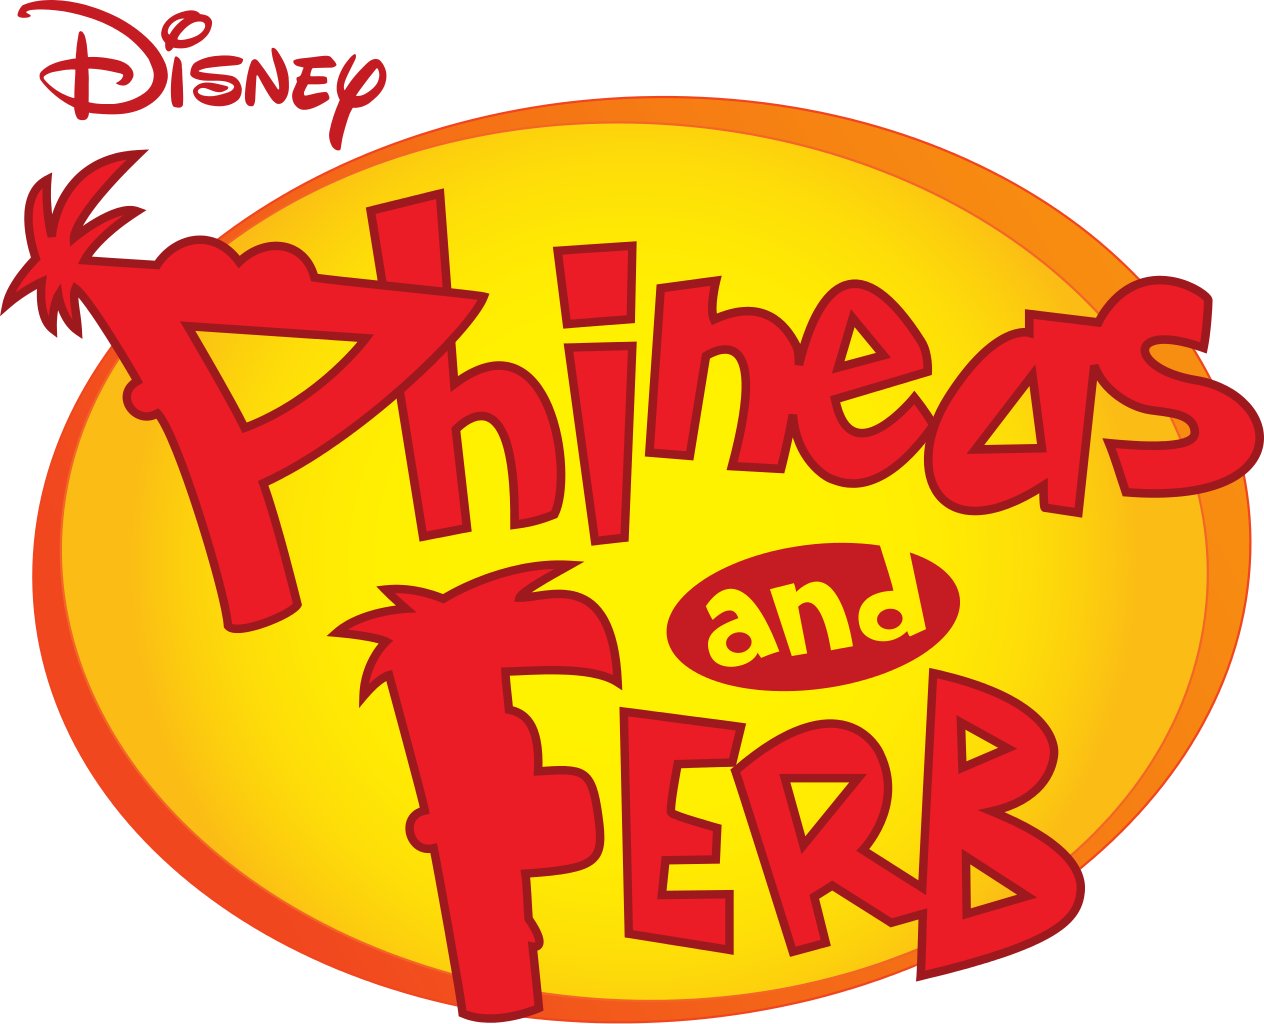 Phineas and Ferb - Wikipedia, the free encyclopedia